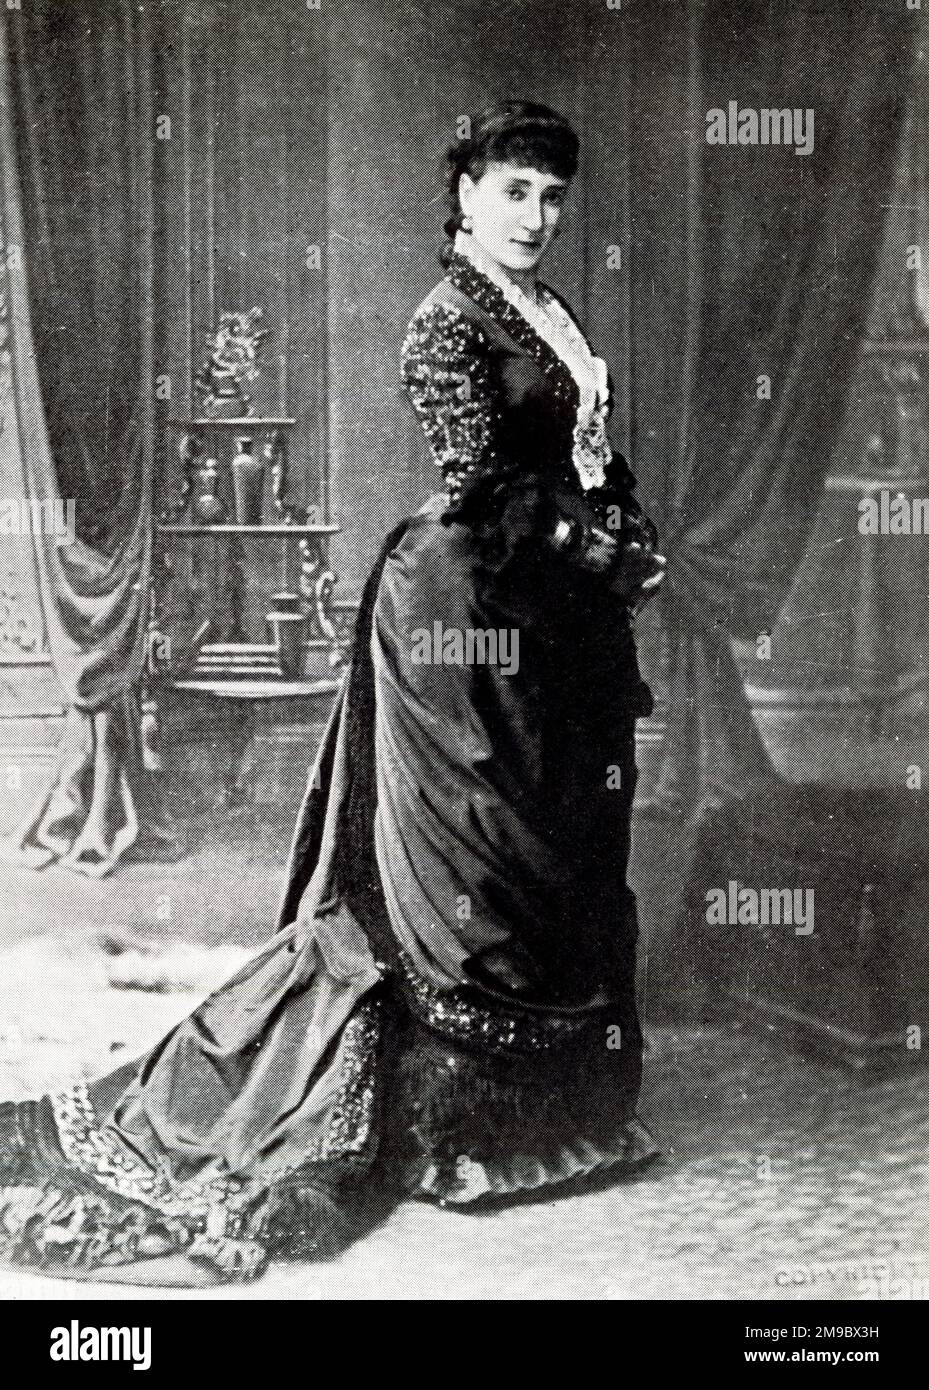 Matilda Charlotte Wood, English actress (known as Mrs John Wood). She managed the Court Theatre (Sloane Square, London) between 1883 and 1891, including several productions of Pinero's plays. Stock Photo